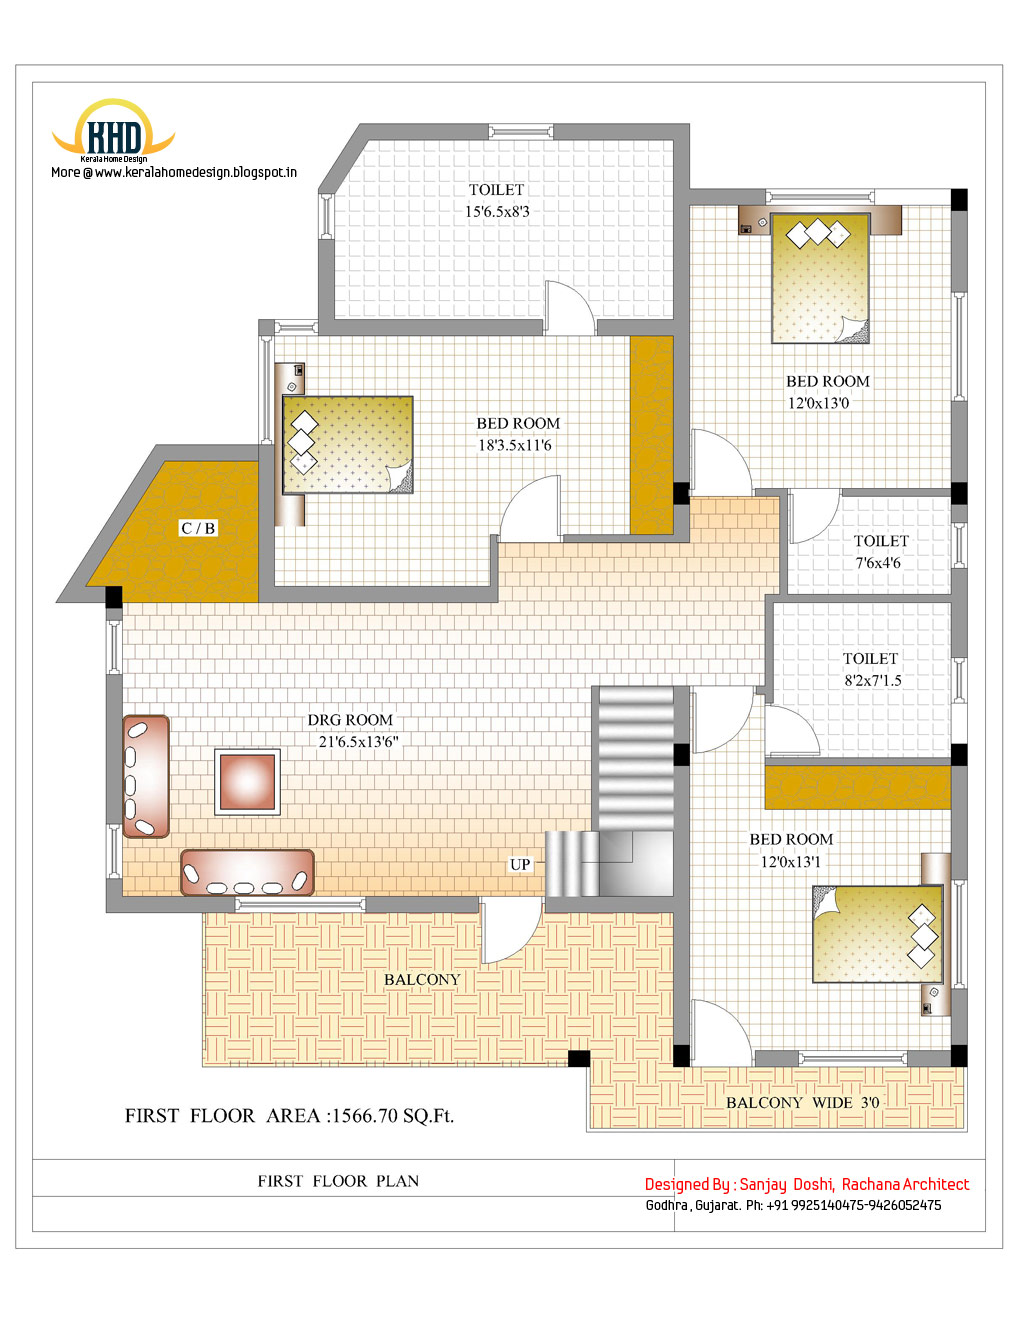 3 Story House Plan and Elevation 3521 Sq Ft Kerala 